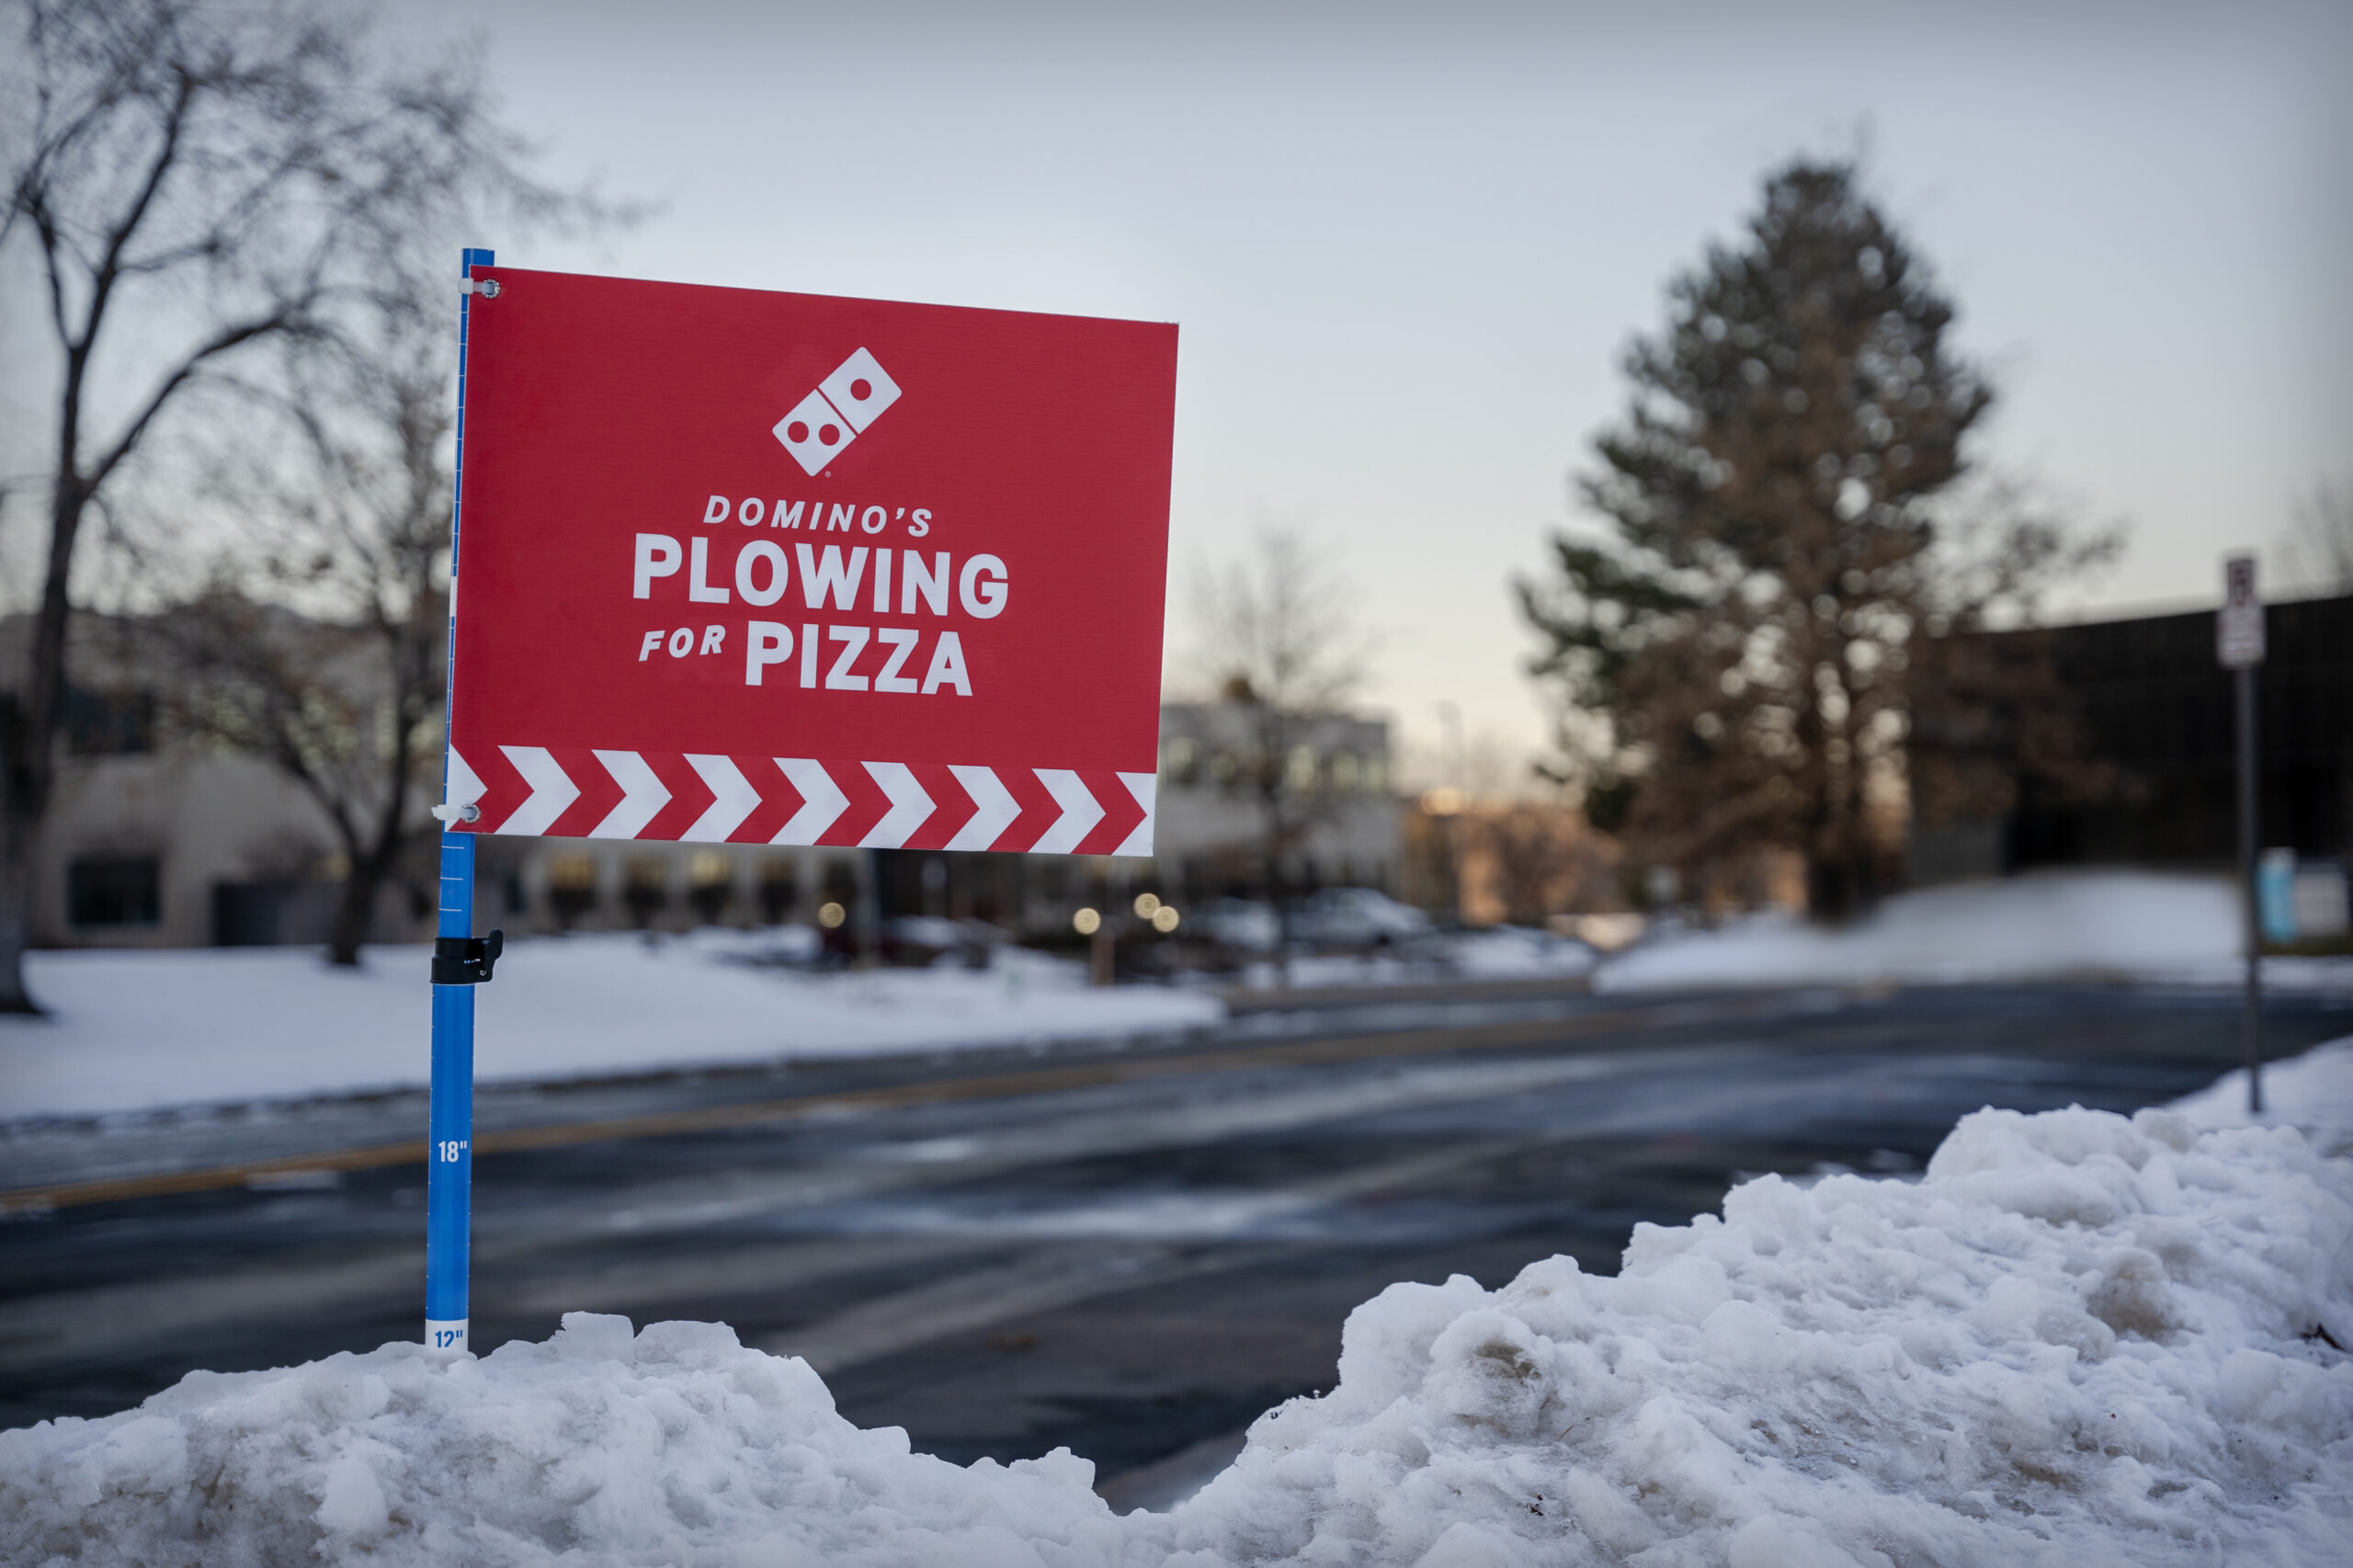 A flag-shaped "Plowing for Pizza" sign planted in snow along a road